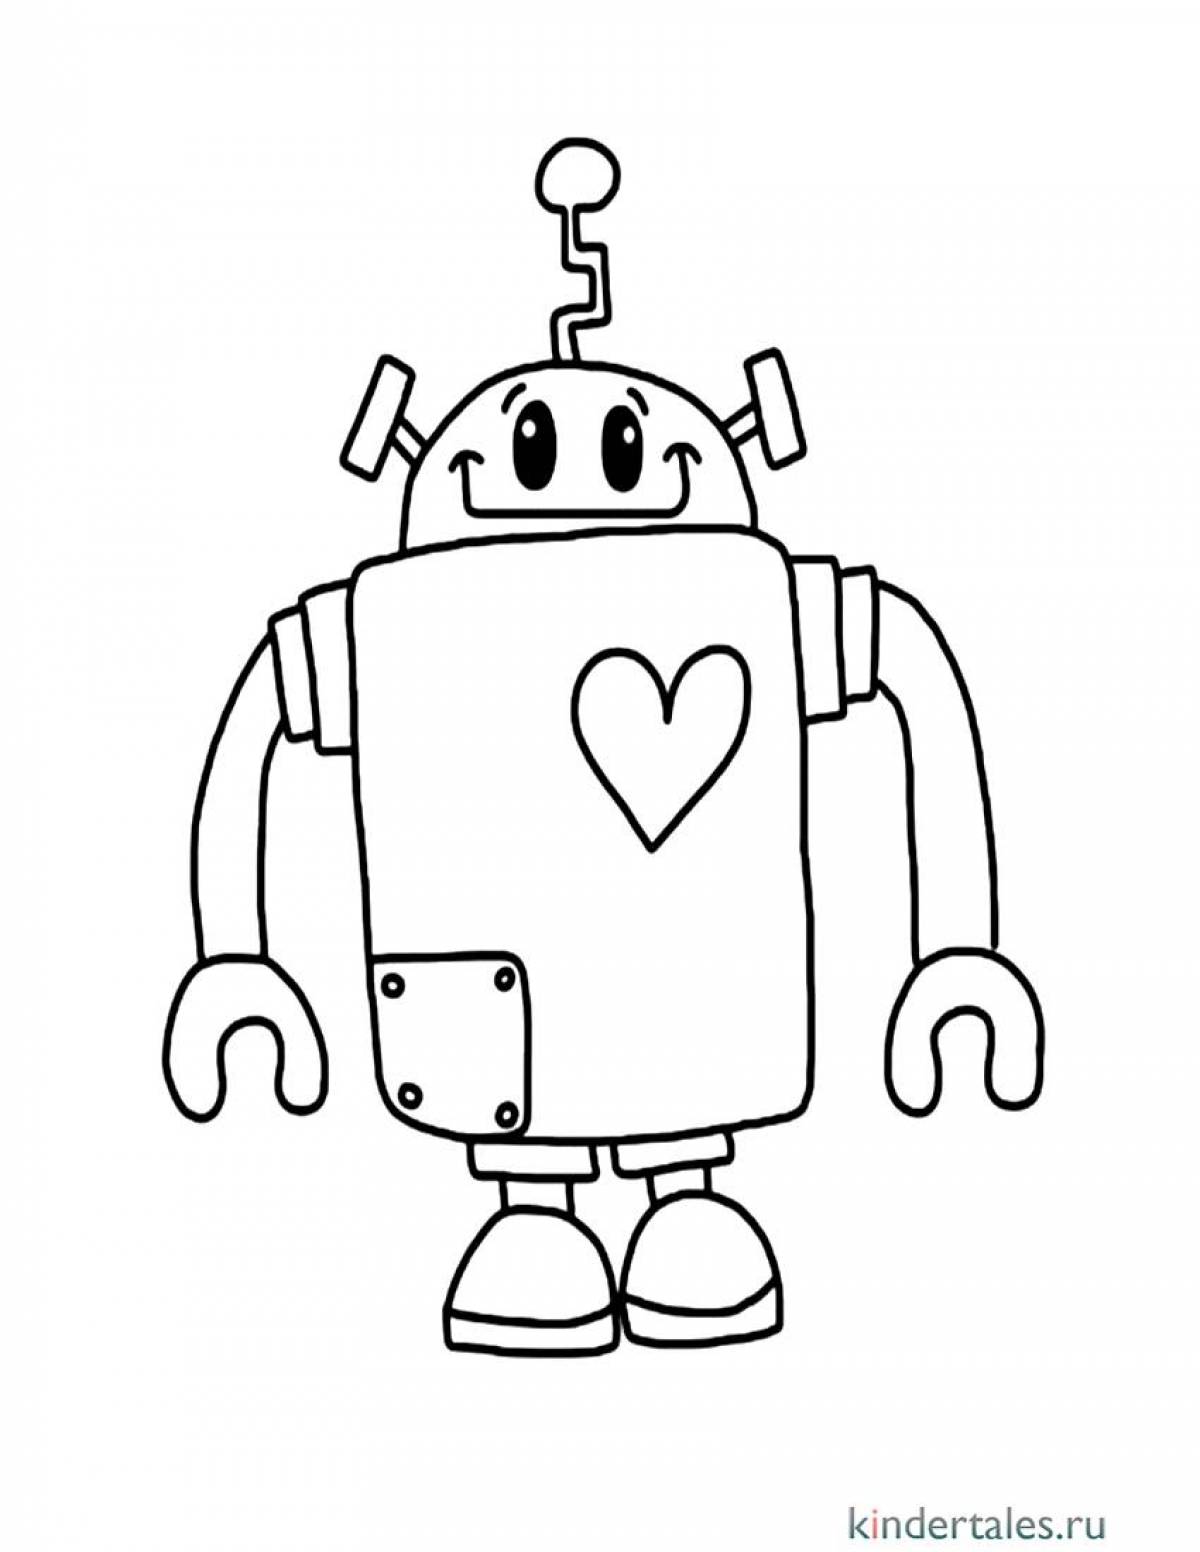 Creative robot coloring page for 5-6 year olds